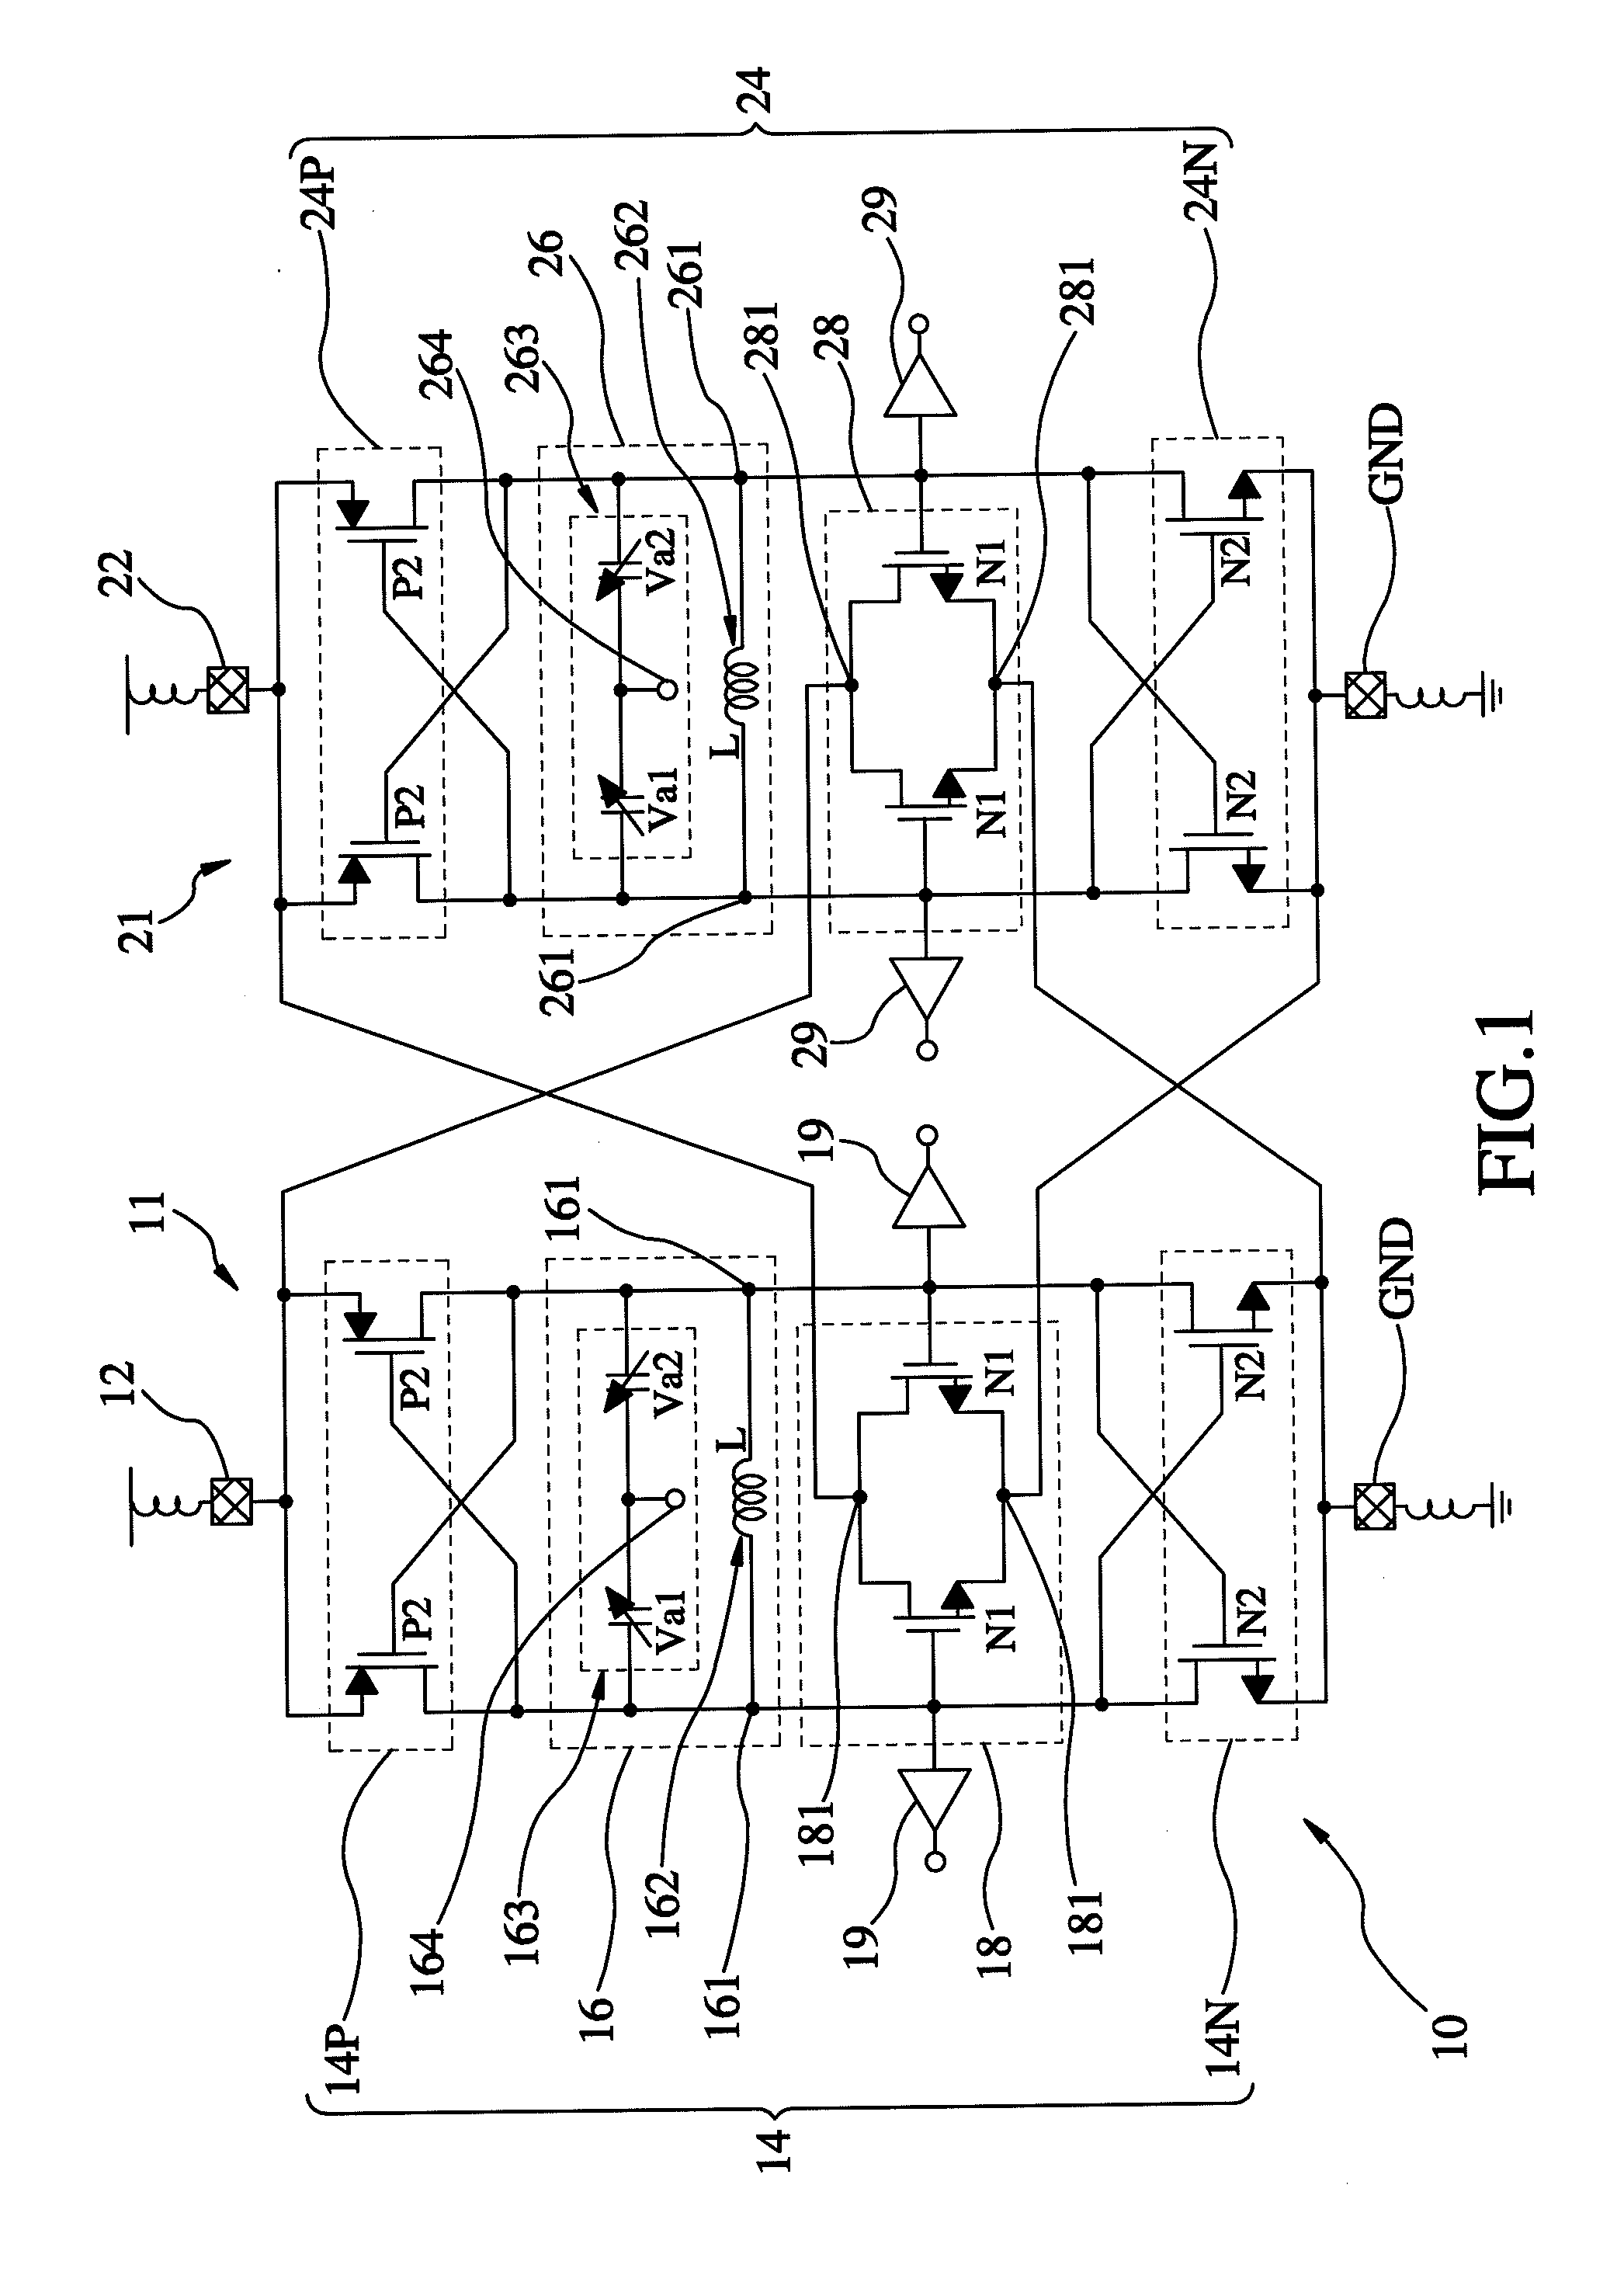 Quadrature voltage-controlled oscillator and method of providing four-phase output signals